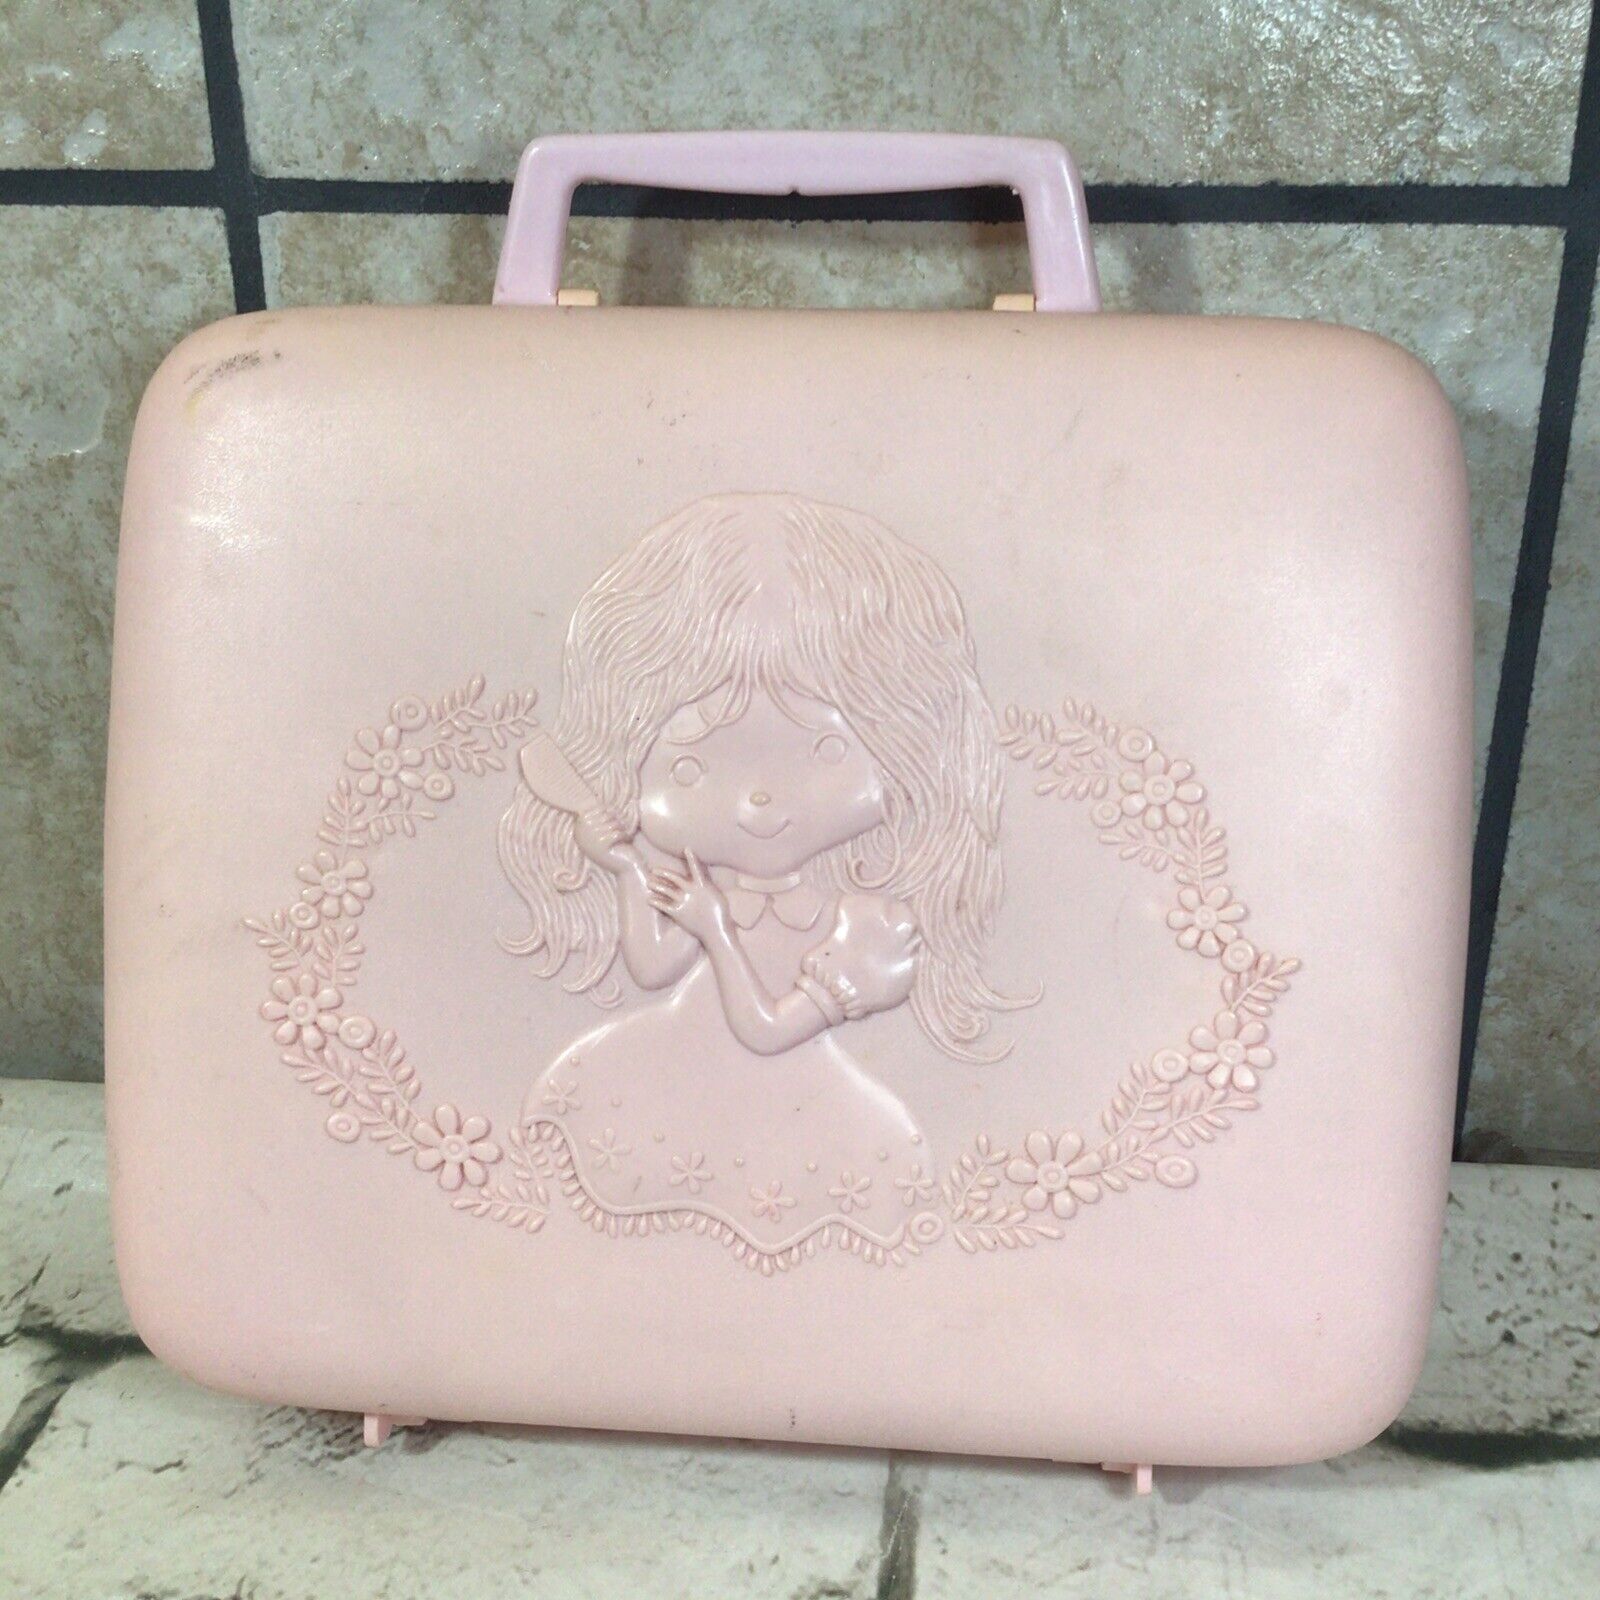 Vintage IMCO Toy Make Up Vanity Beauty Cosmetic Kit Pink Case Near Complete Flaw